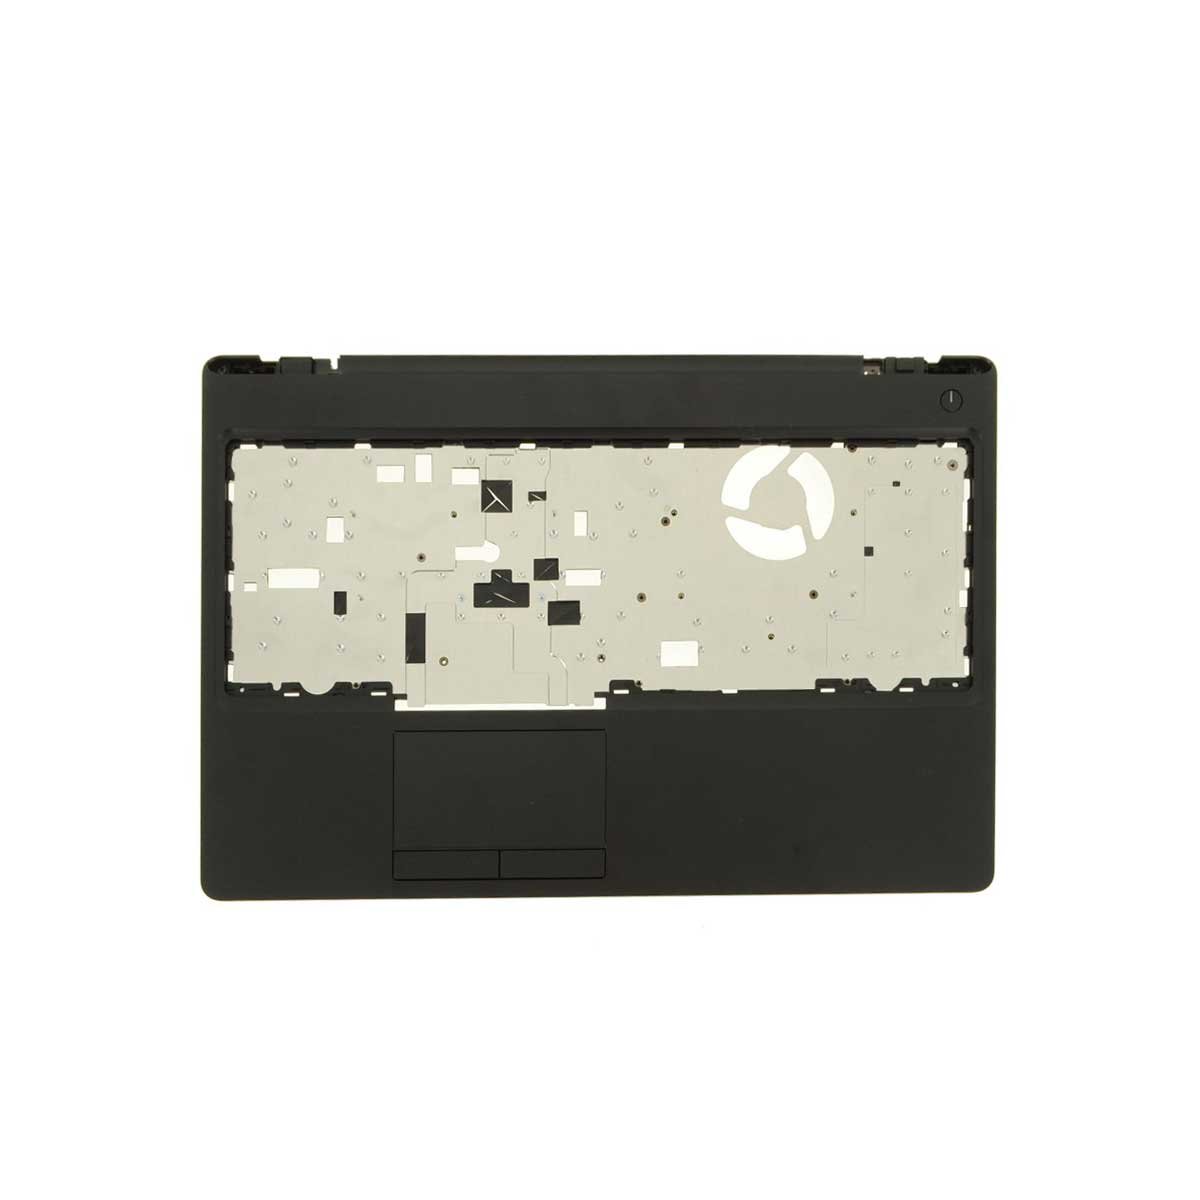 Dell Latitude 5580 Precision 3520 OEM Palmrest Touchpad Assembly P/N M9NWK, A166U5